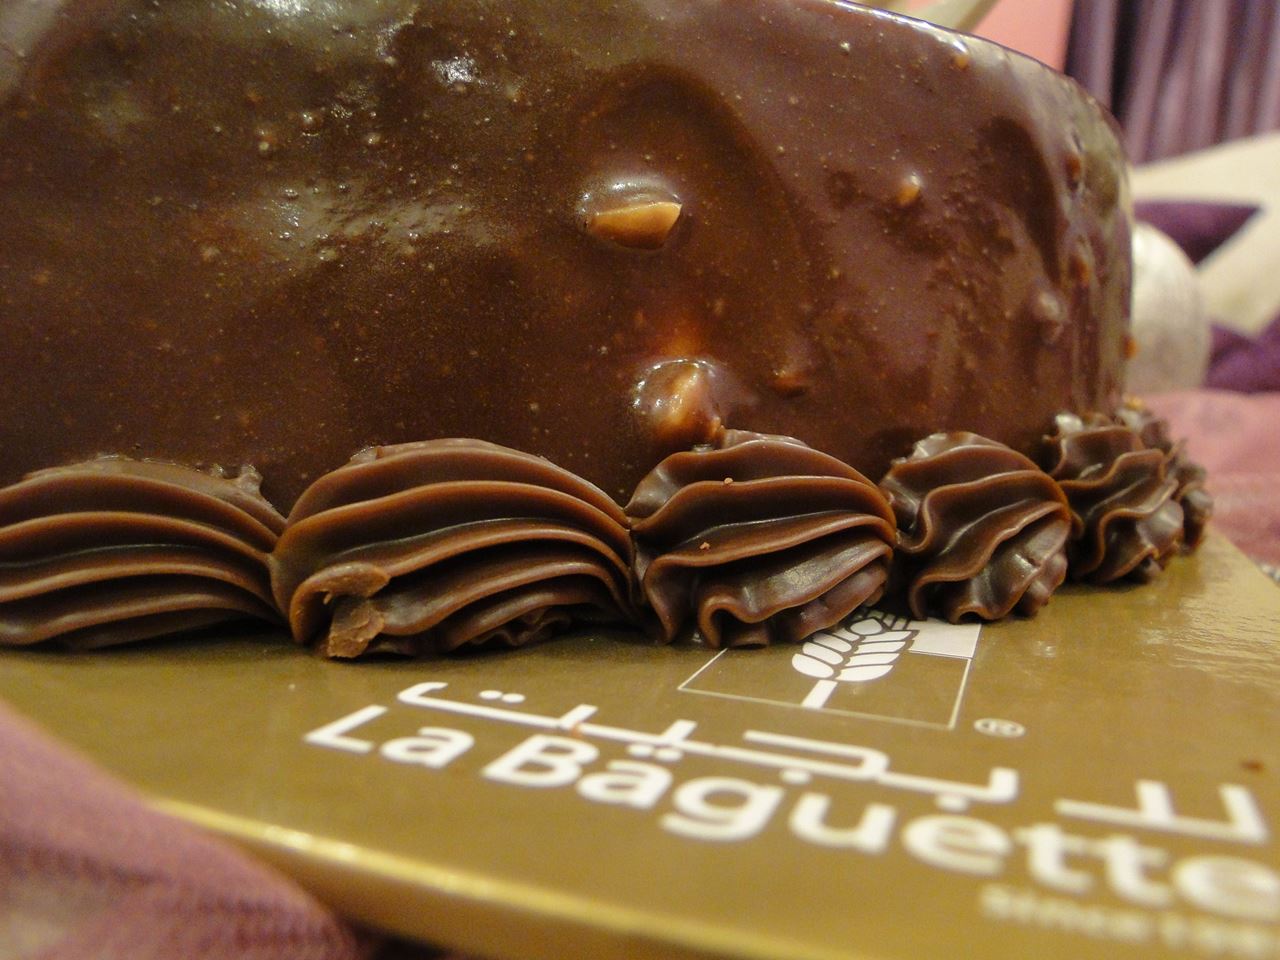 Chocolate cake and croissants from La Baguette